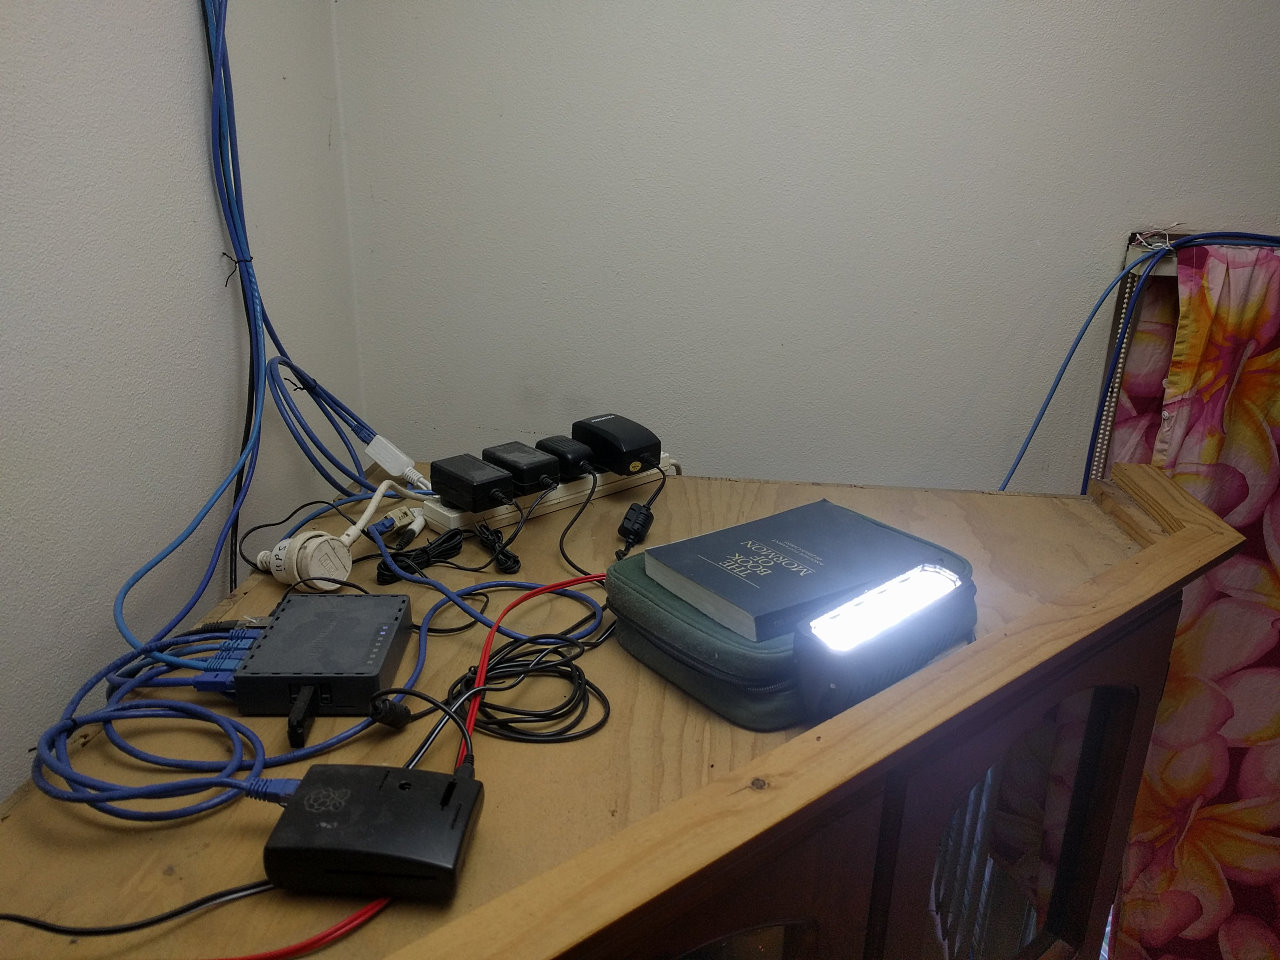 The floodlight sits next to my router and pi-hole, propped up with some books.